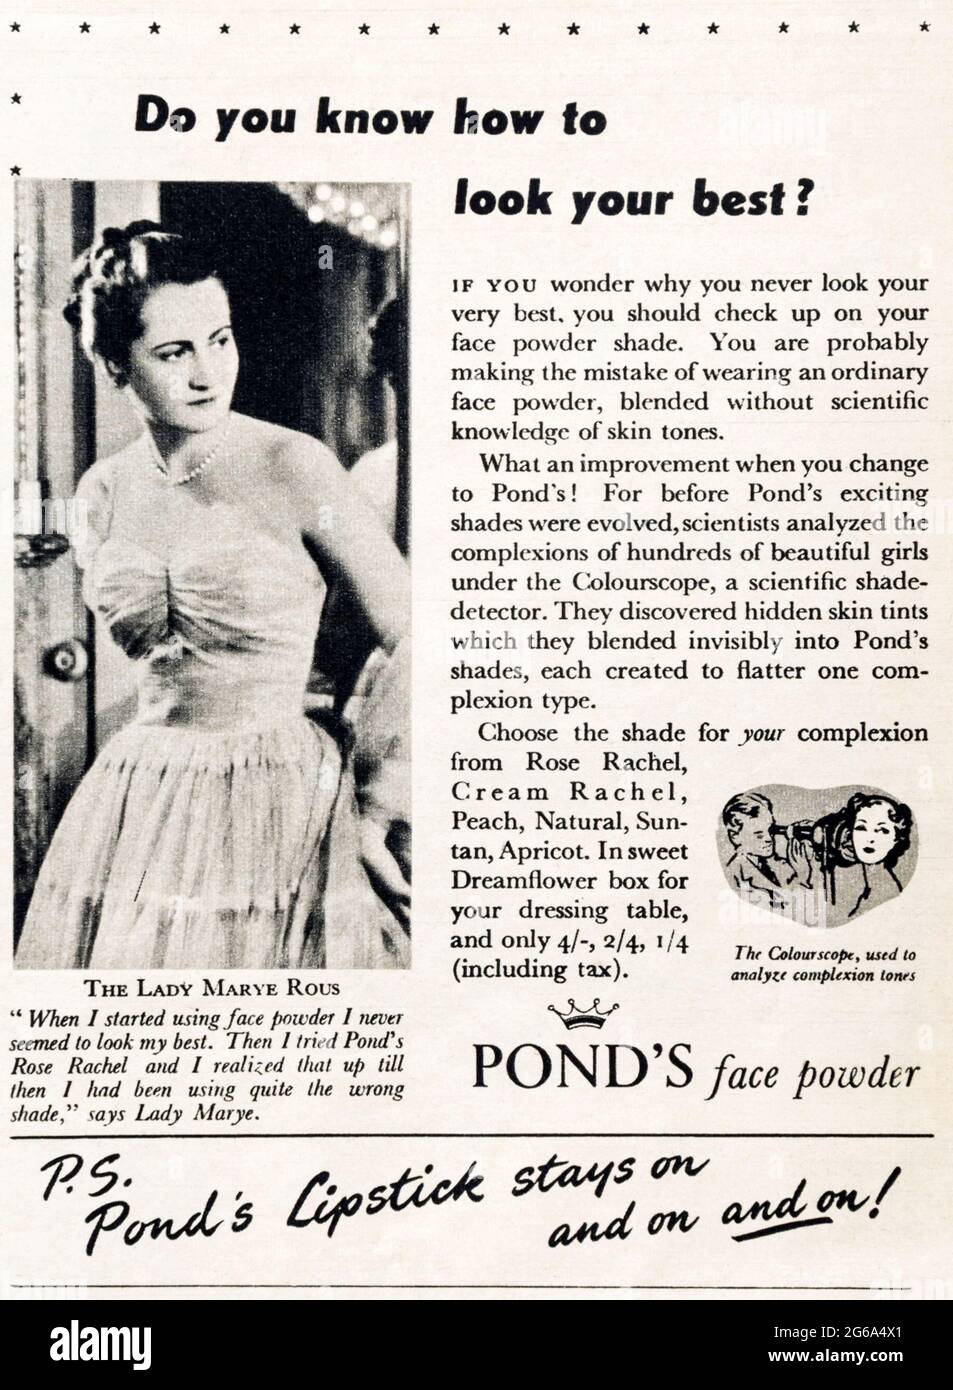 A 1950s magazine advertisement for Pond's face powder. Stock Photo